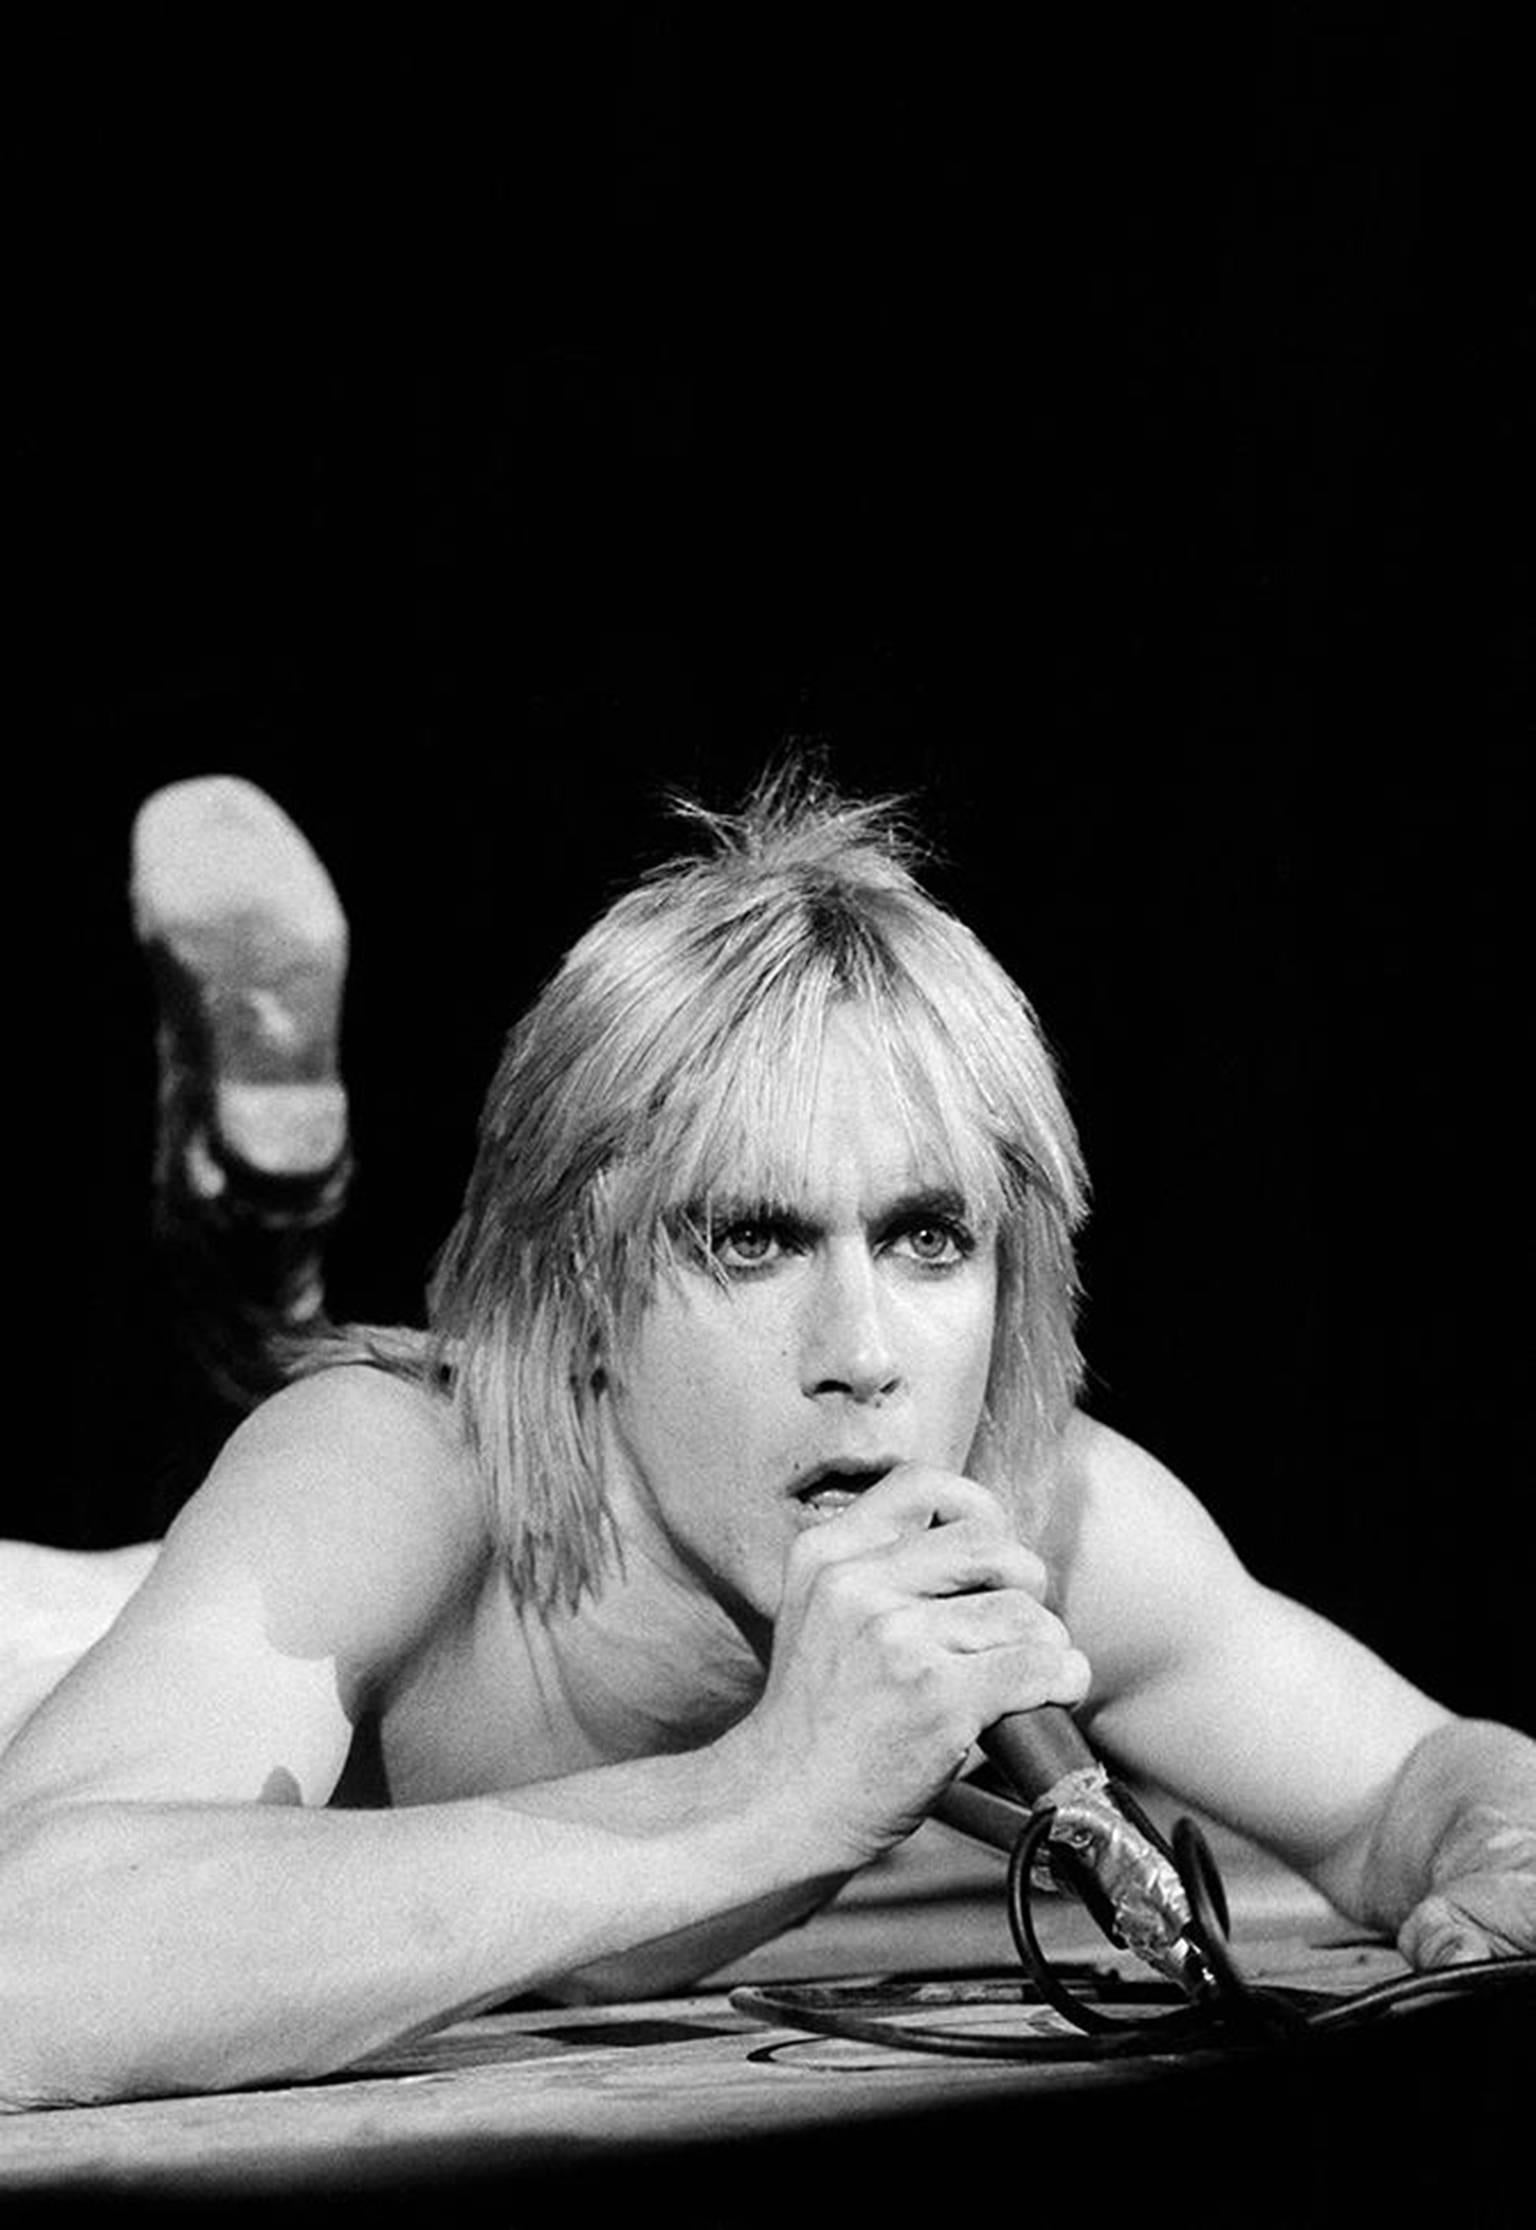 Bill Green Black and White Photograph - Iggy Pop Looking on the Floor, 1973